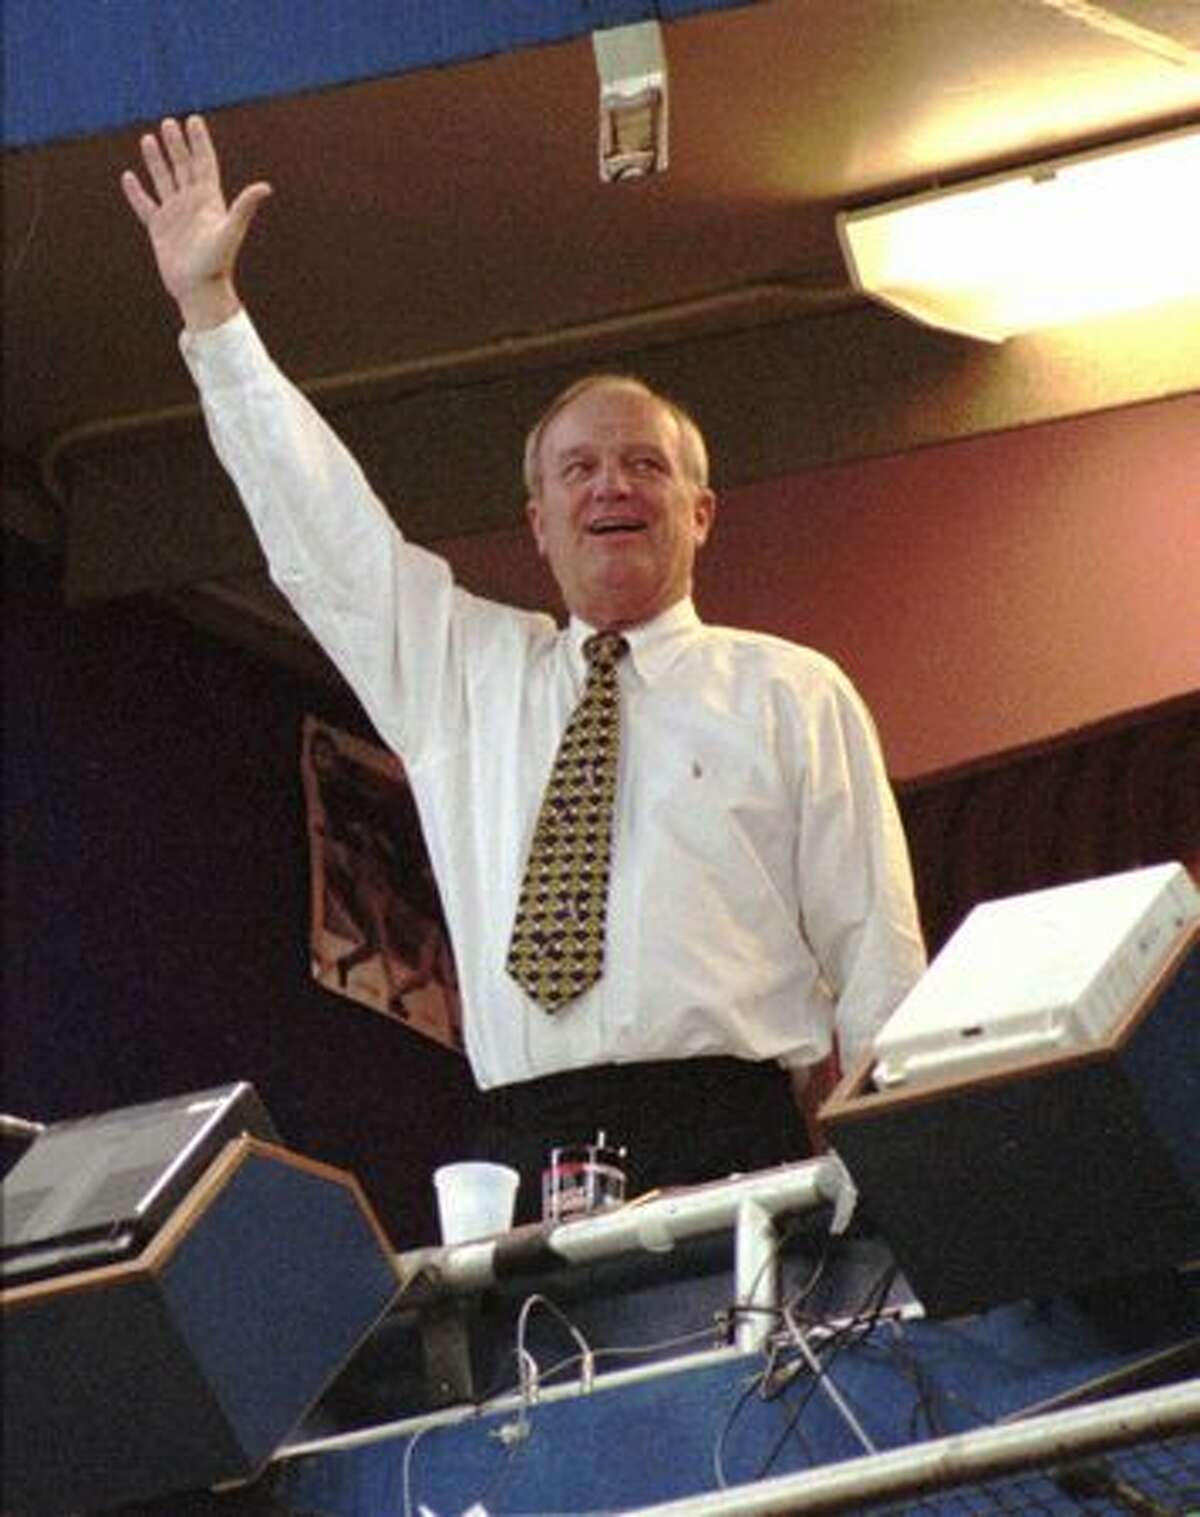 Seattle Mariners longtime radio announcer Dave Niehaus waves from the Kingdome broadcast booth Sept. 22, 1996. The appearance was Niehaus' first since a second angioplasty sidelined him earlier in the month. (Robert Sorbo/The Associated Press/seattlepi.com file)